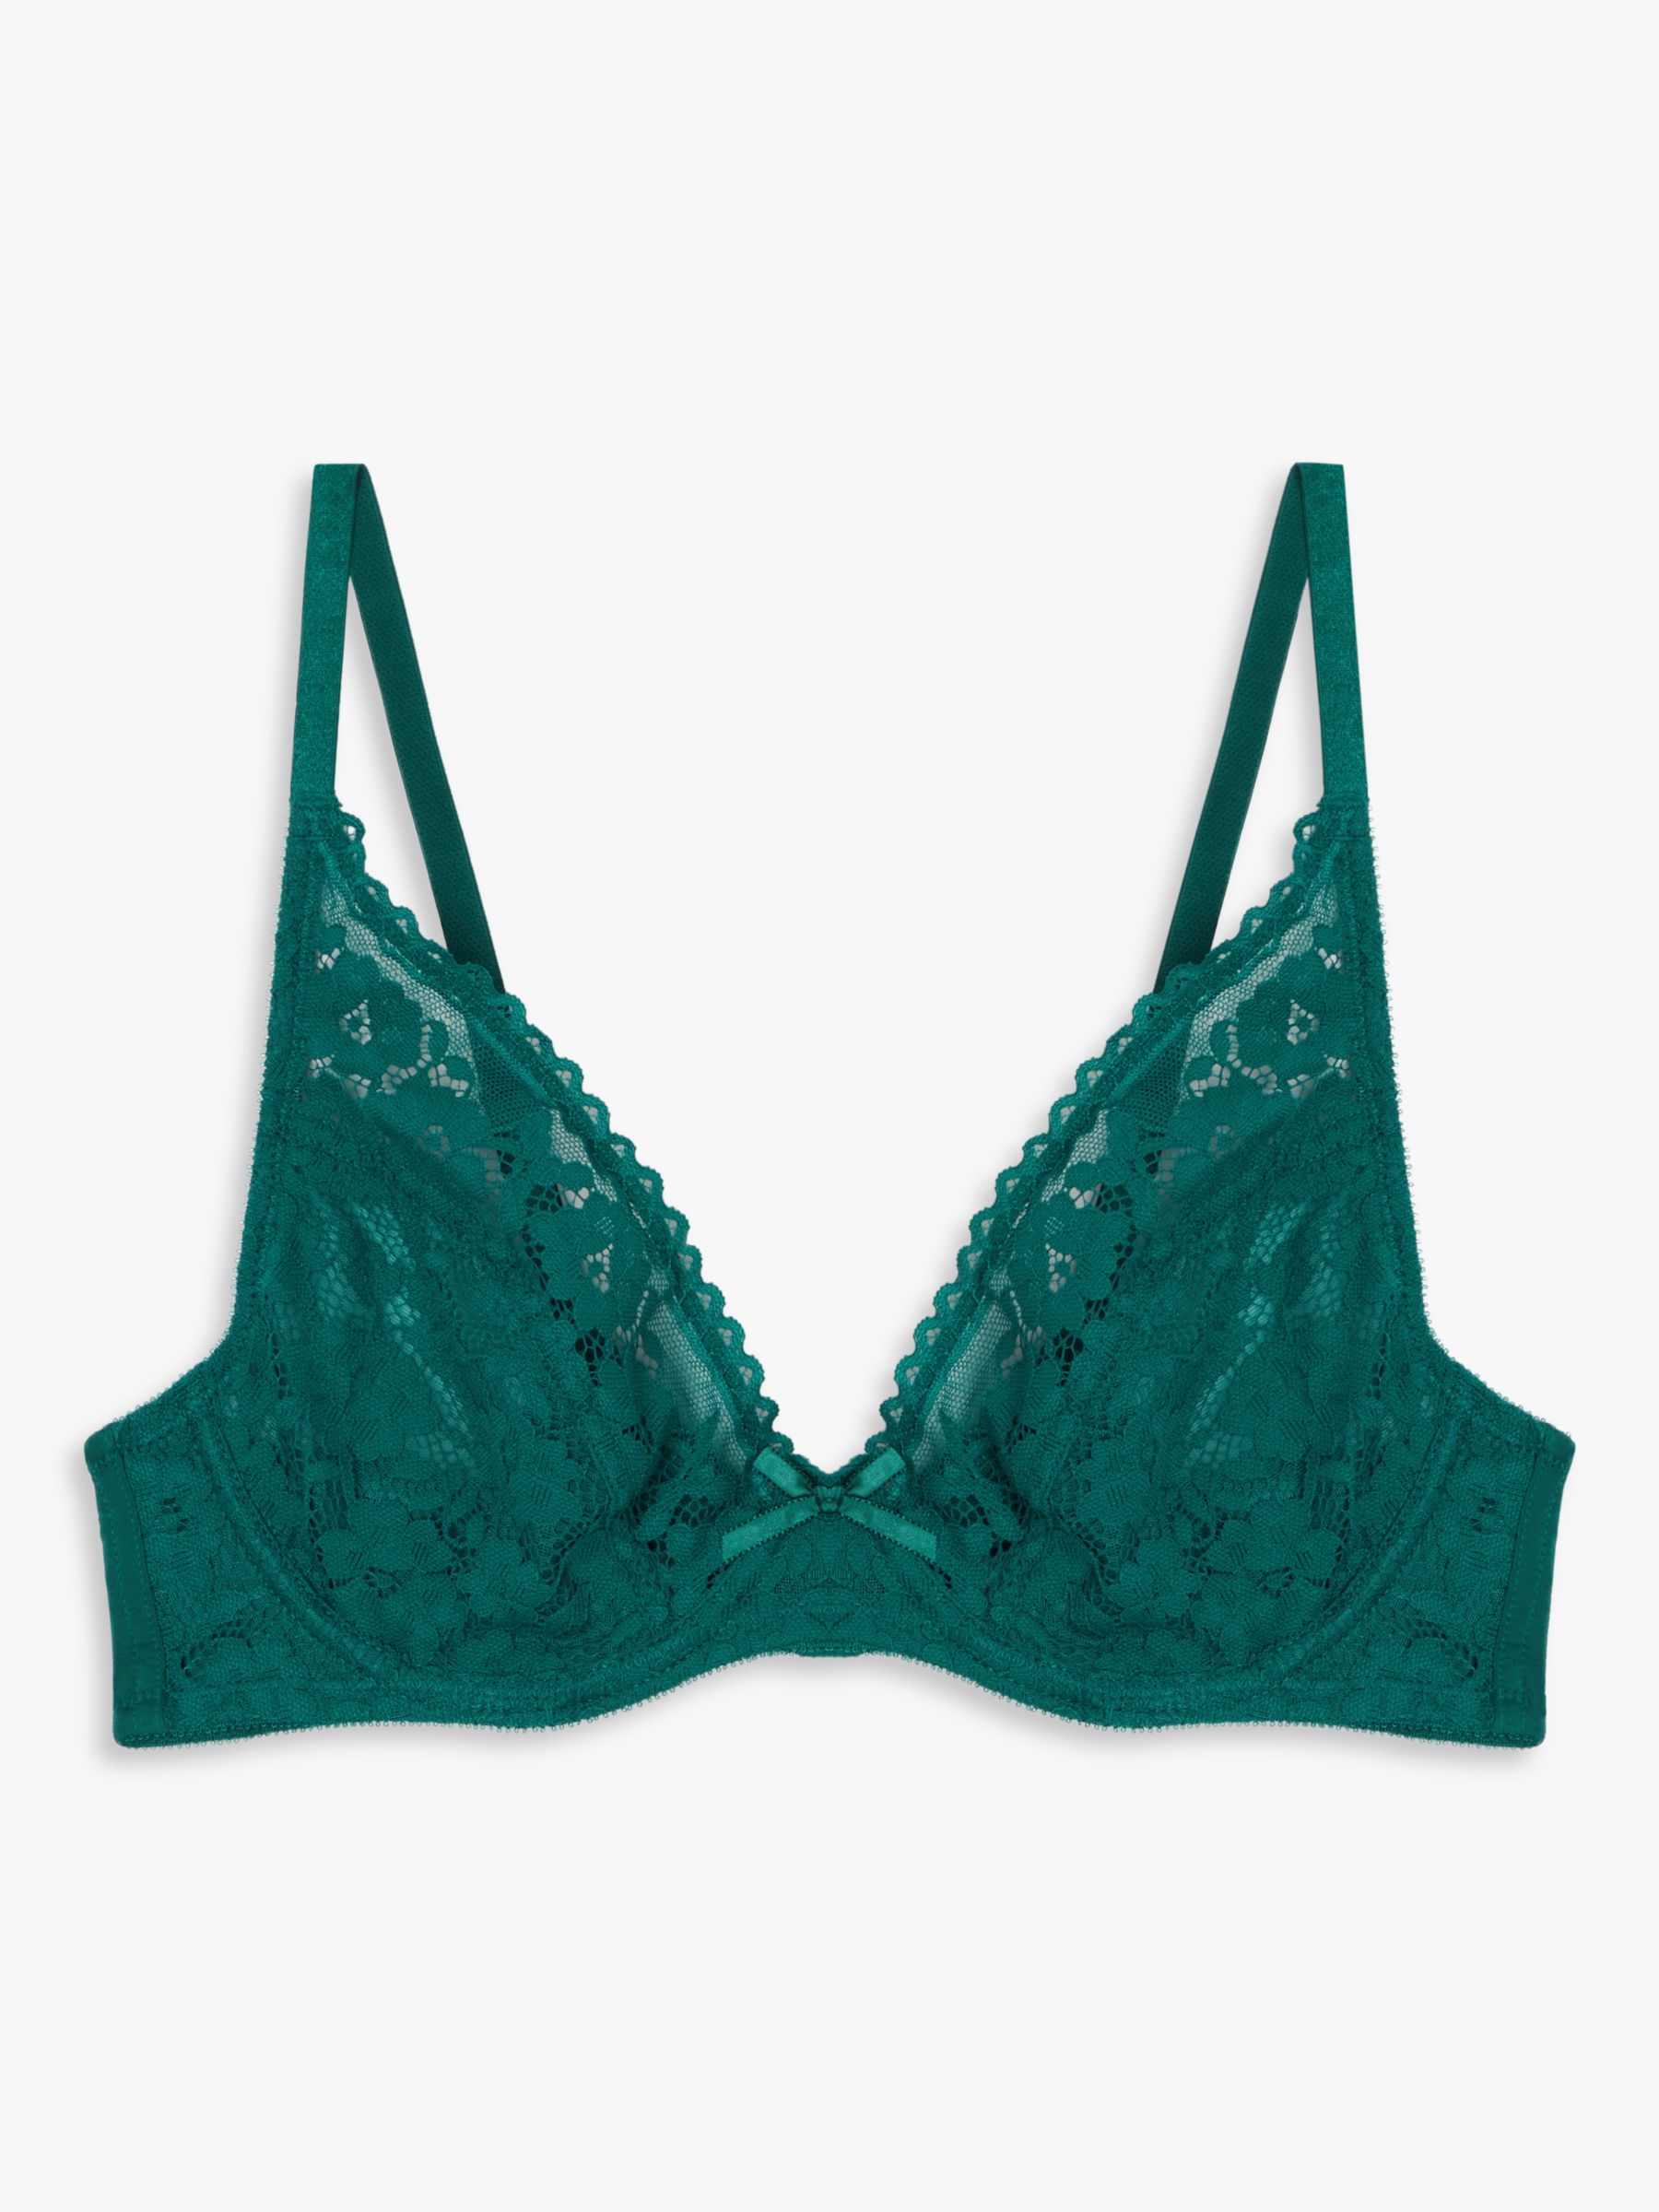 John Lewis Everley Lace Non-Padded Underwired Bra, Classic Blue Size Uk30D, X#